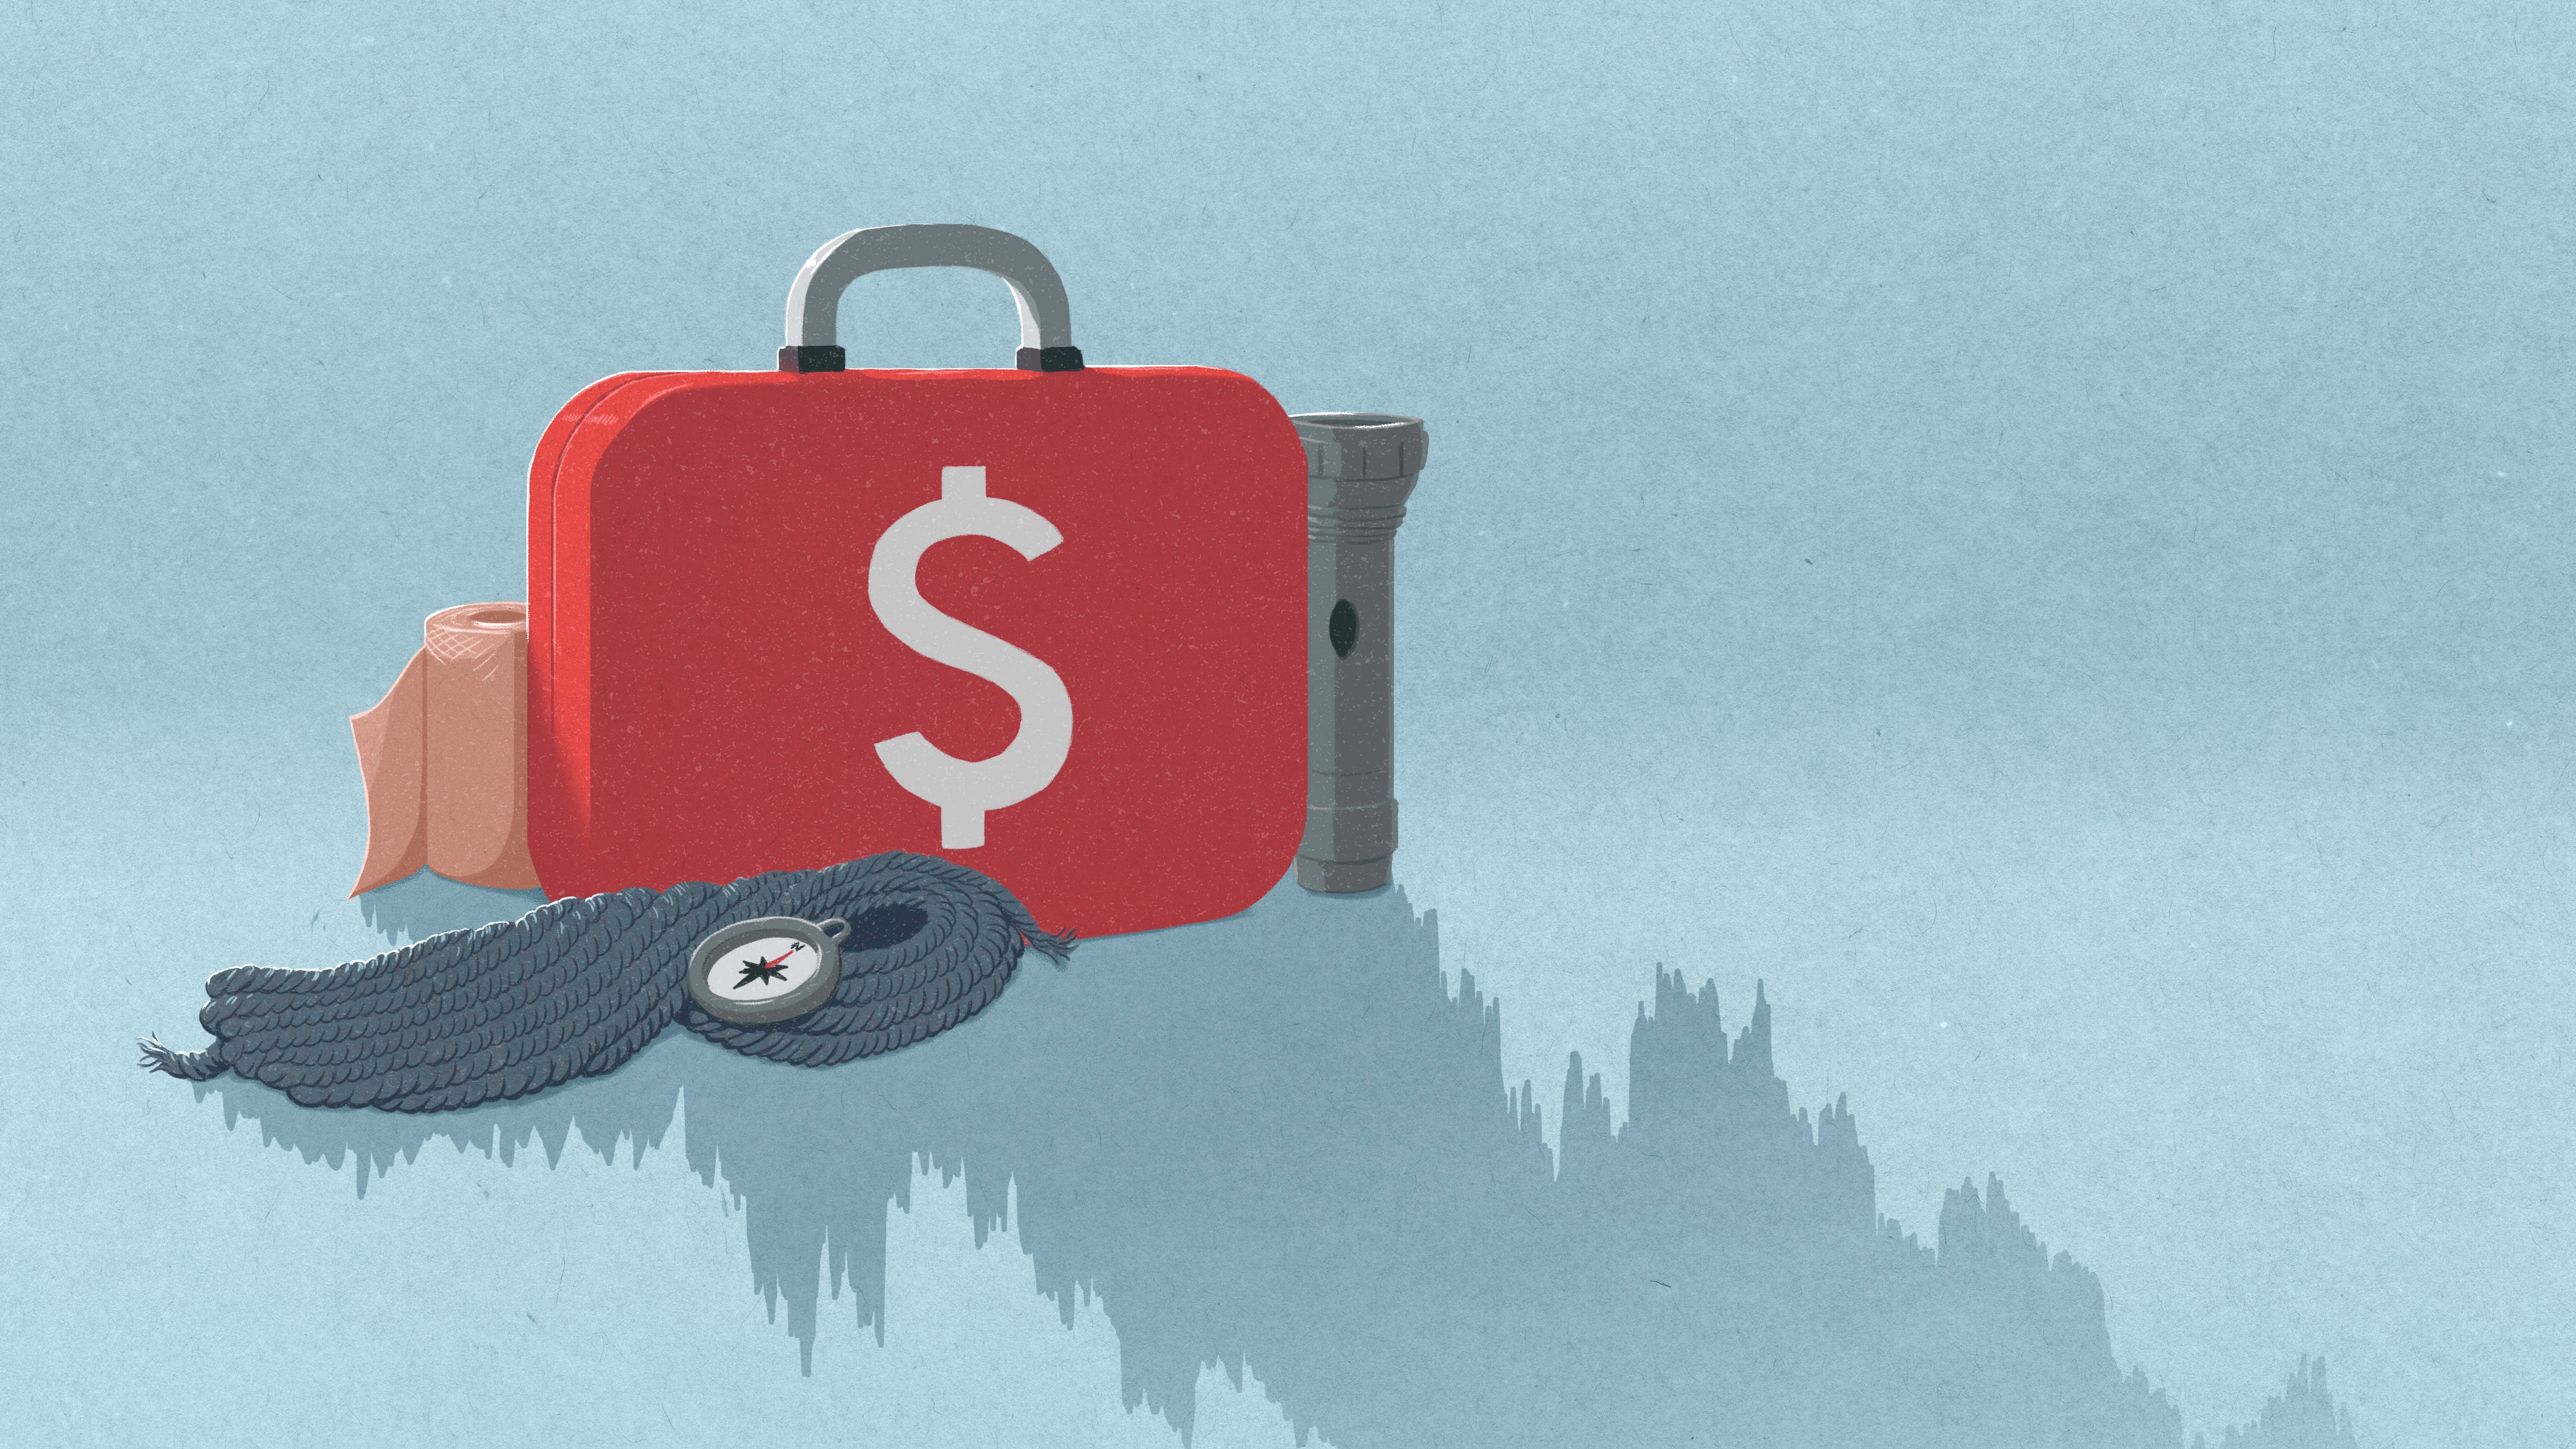 illustration of luggage with a dollar sign